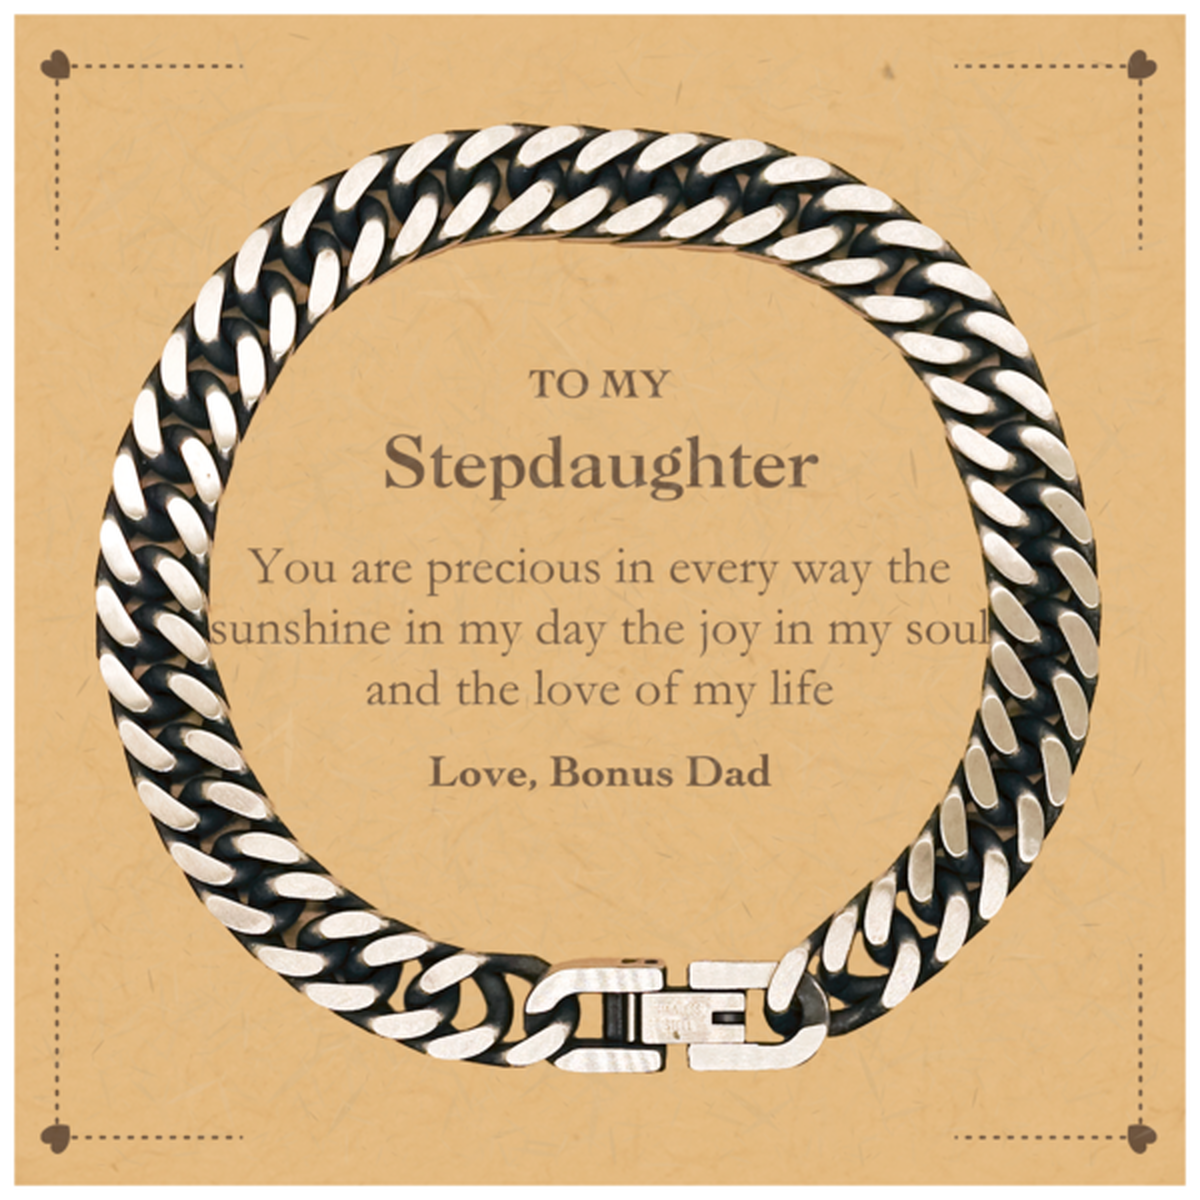 Graduation Gifts for Stepdaughter Cuban Link Chain Bracelet Present from Bonus Dad, Christmas Stepdaughter Birthday Gifts Stepdaughter You are precious in every way the sunshine in my day. Love, Bonus Dad